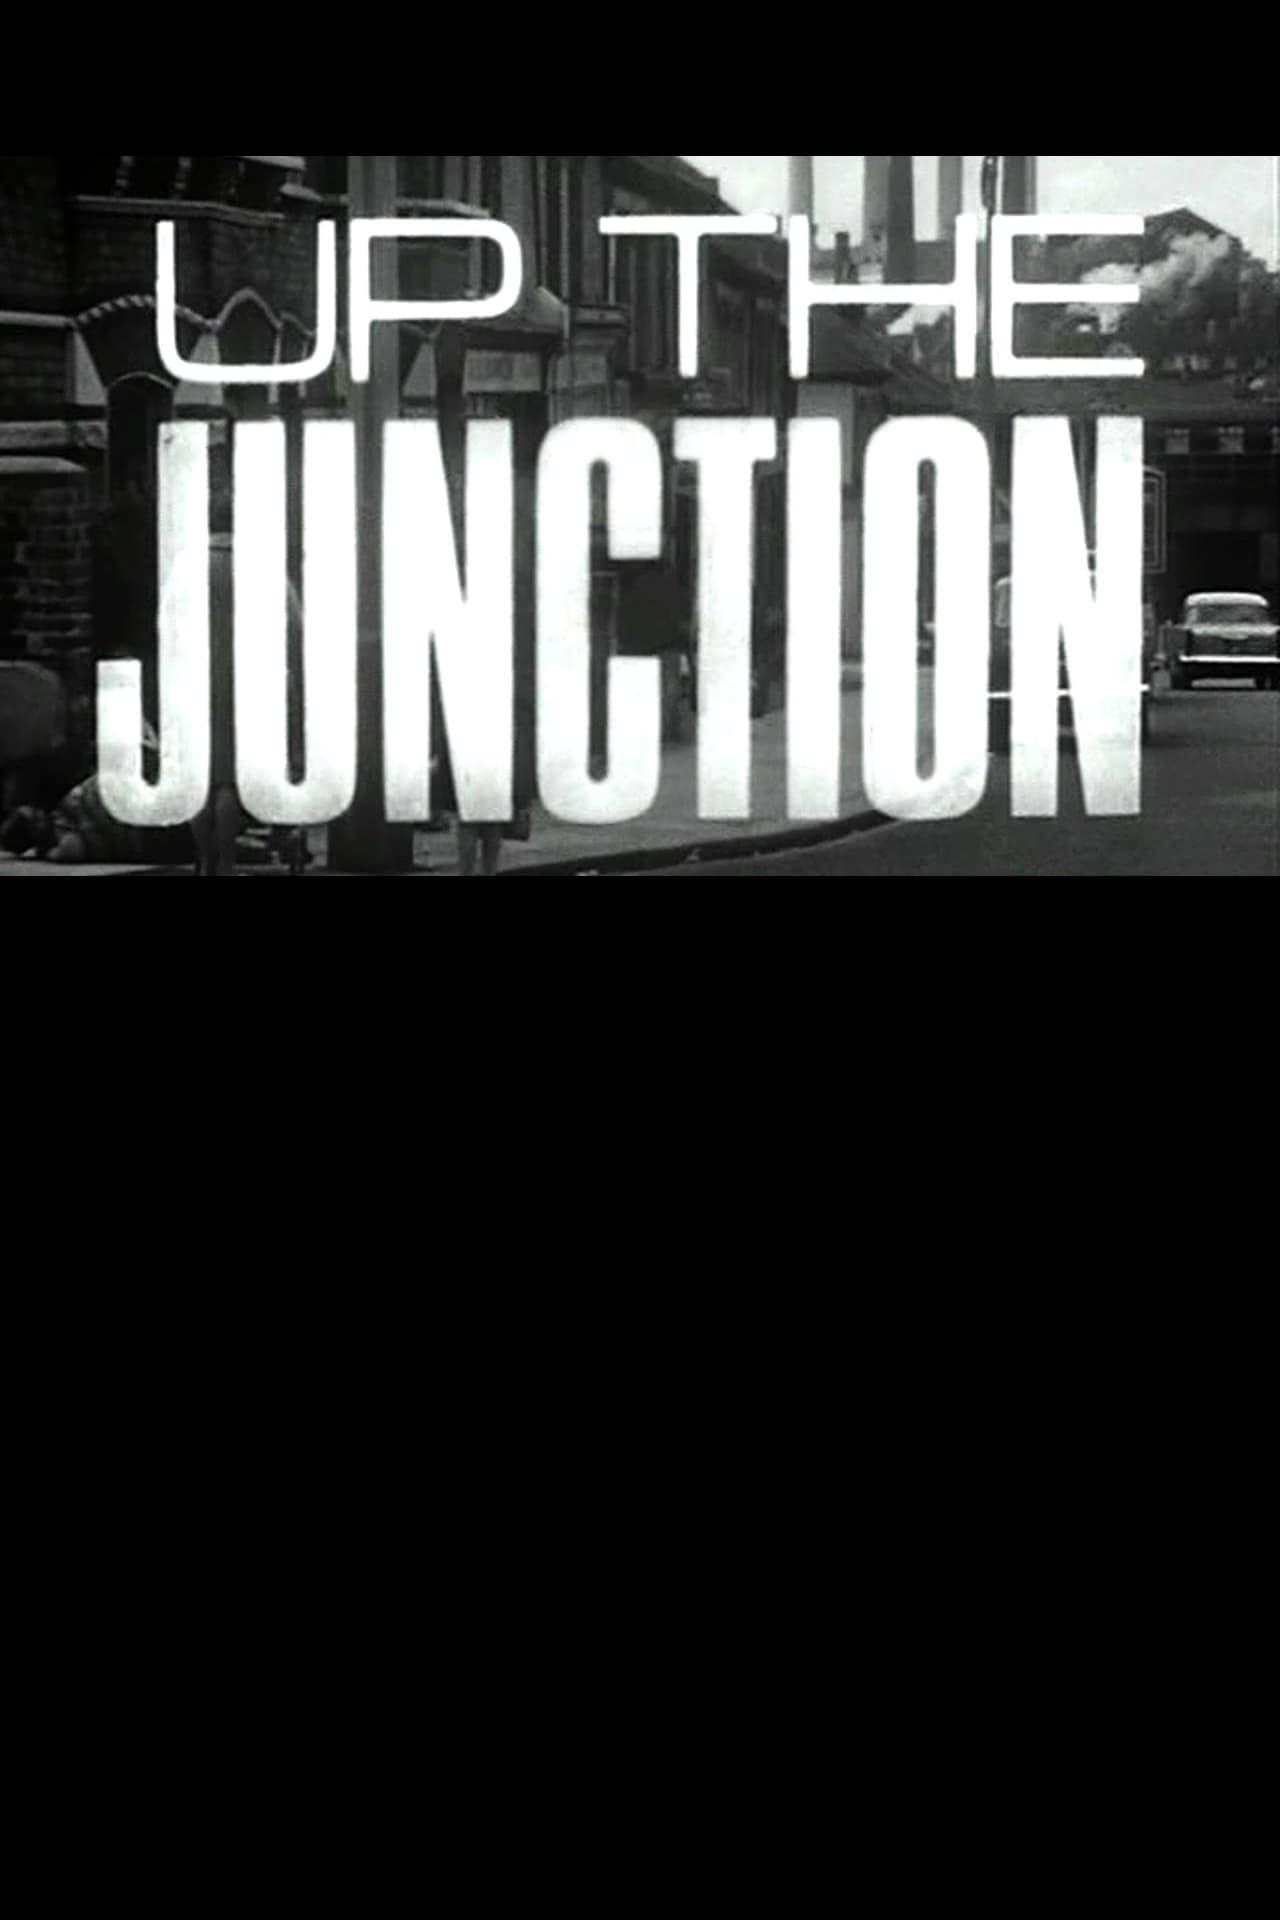 Up the Junction poster